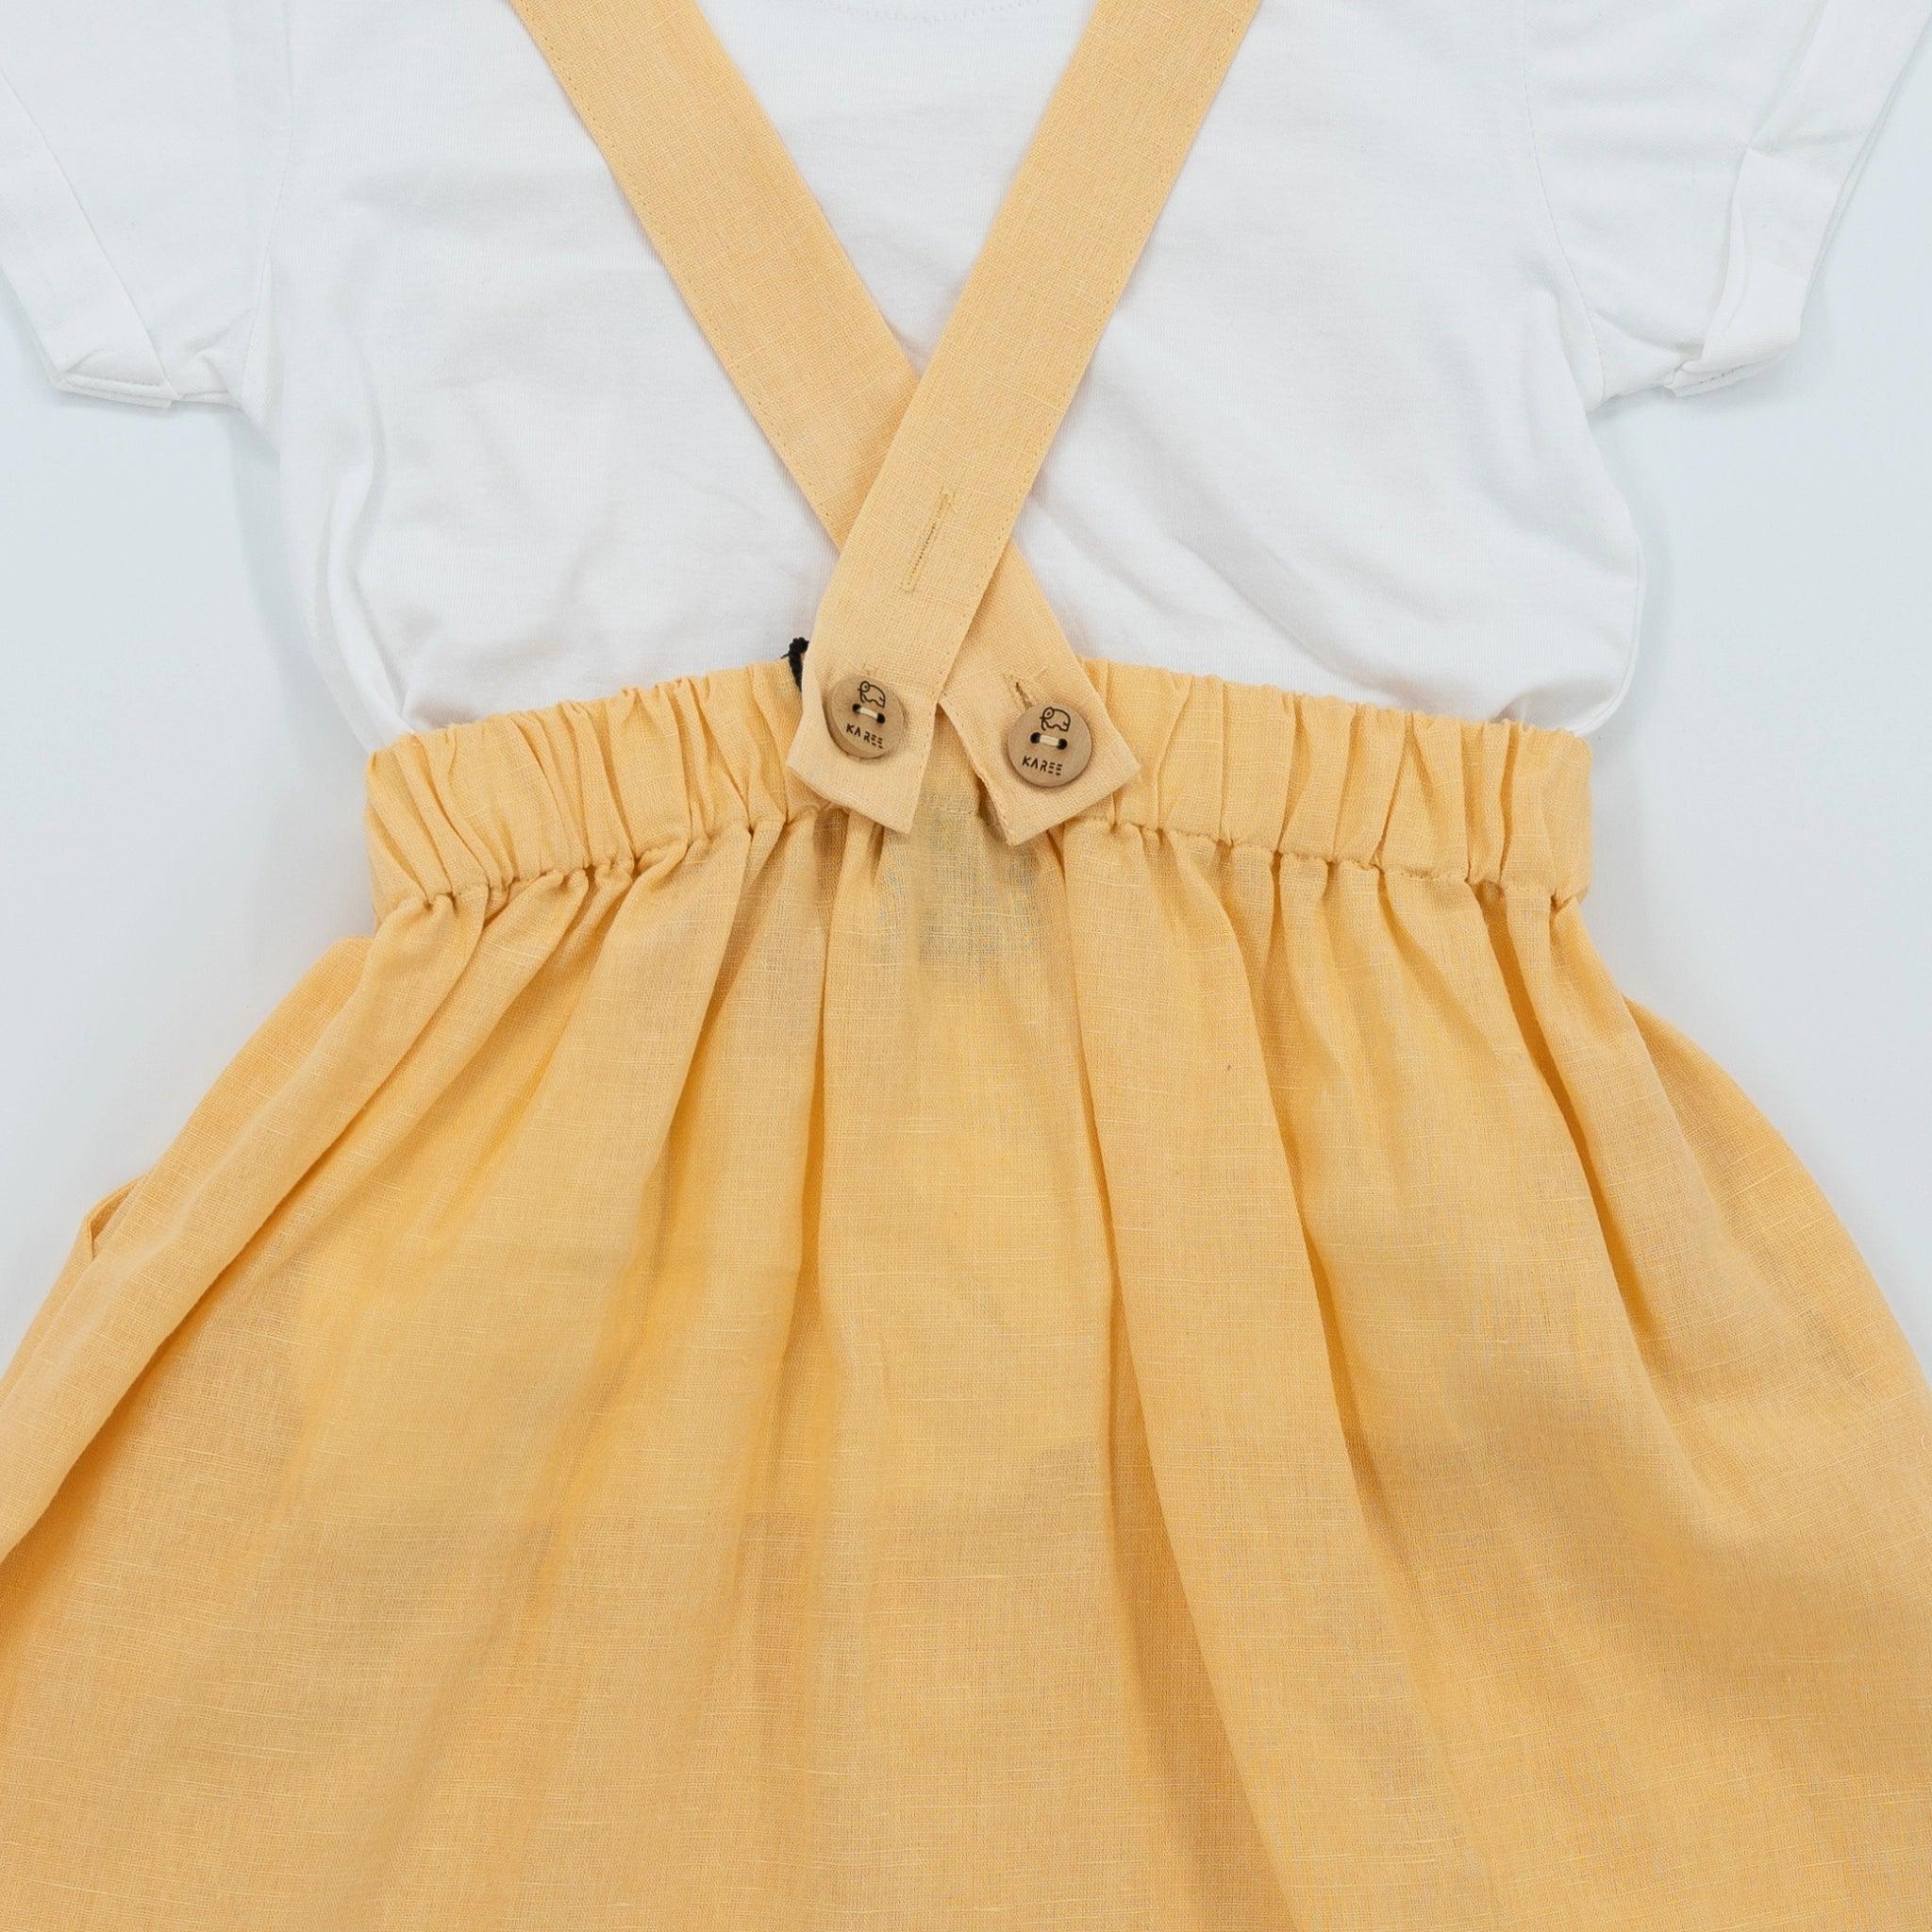 Close-up of a child's outfit with a white t-shirt and Golden Fleece Linen Pinafore made from premium linen cotton, displayed against a white background by Karee.